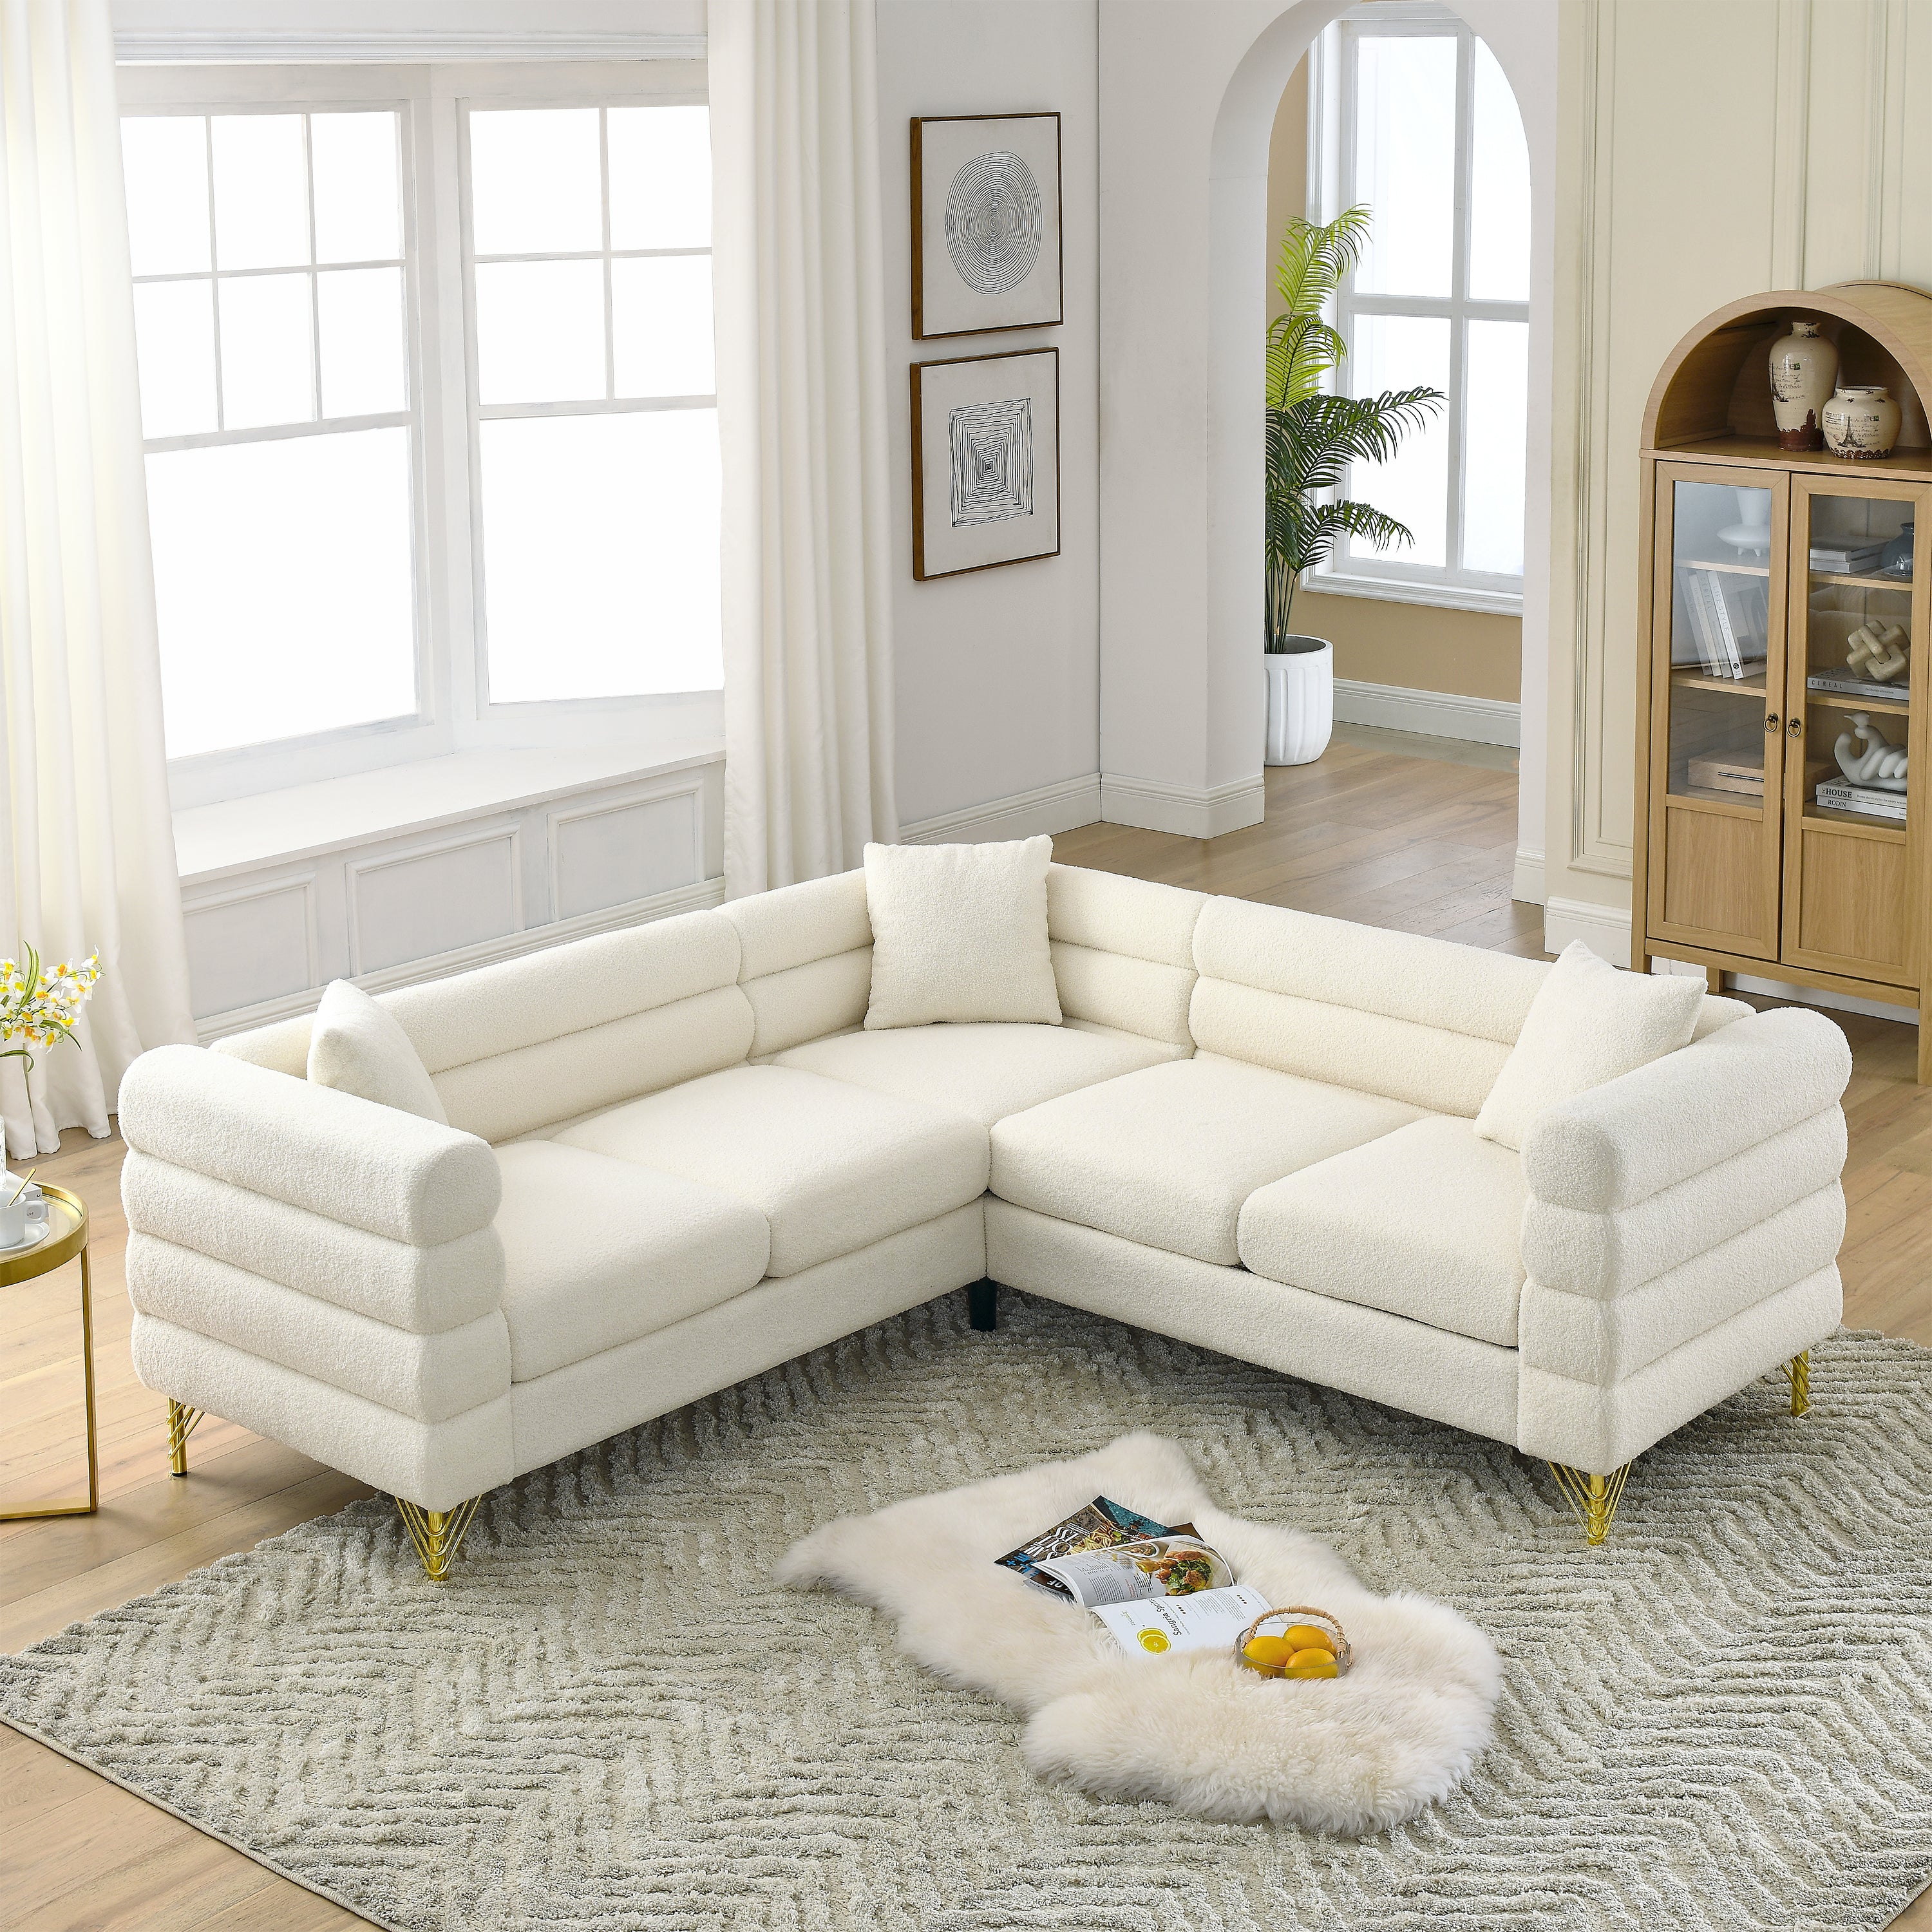 Lorenzi Beige Boucle Fabric Upholstered Sectional Sofa with Gold metal Legs